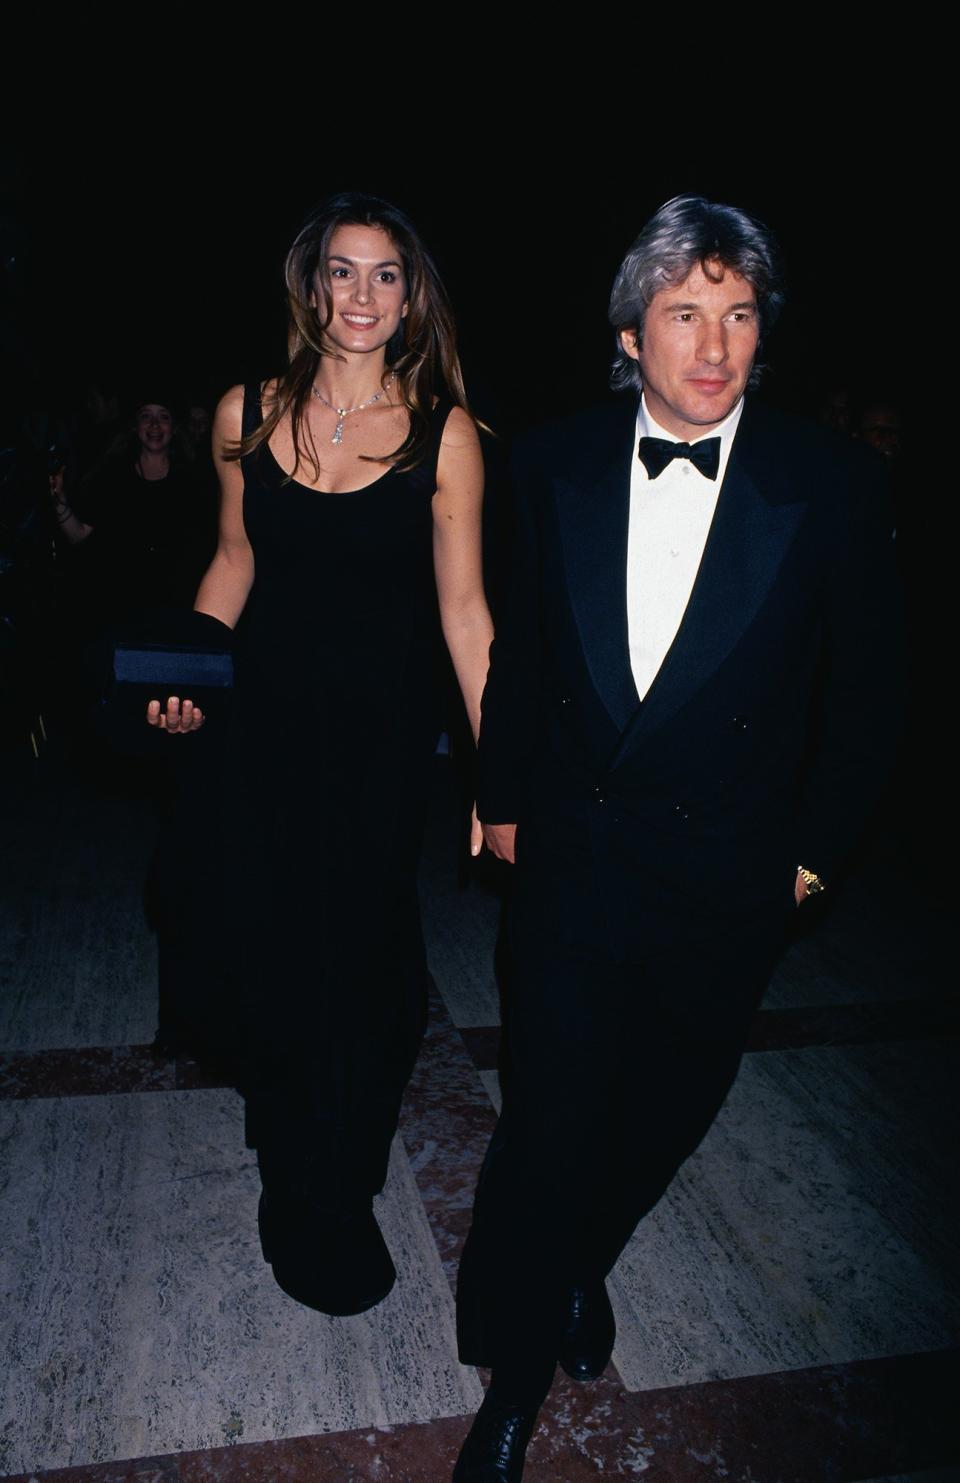 In 1993, the honor went to <b>two people</b> as the "Sexiest Couple Alive": Richard Gere and Cindy Crawford.